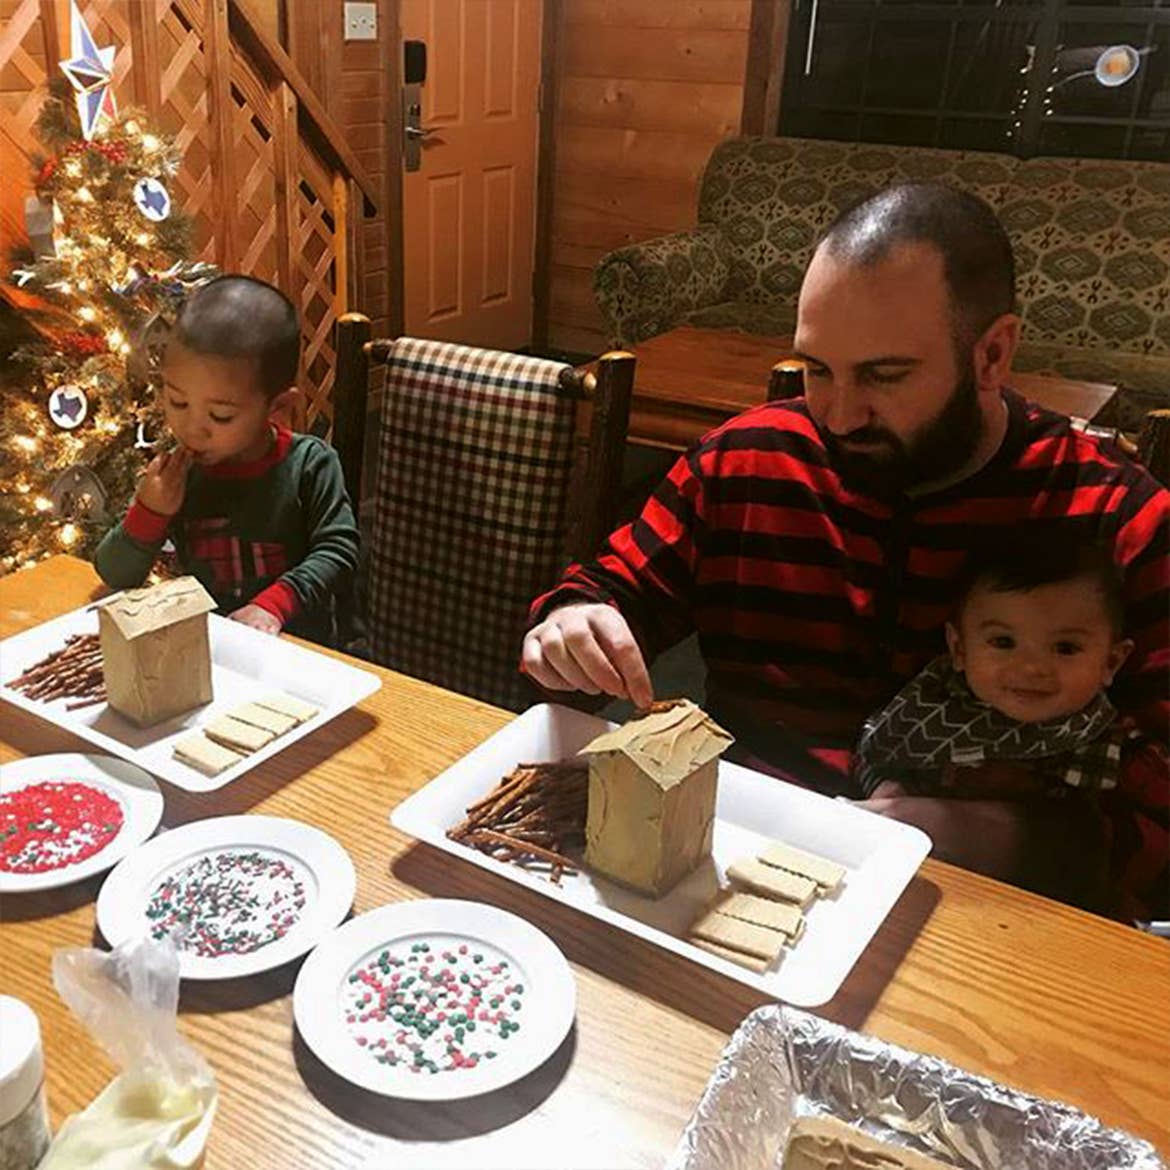 Guests dressed and holiday jammies sit at our Holly Lake resort kitchen table making gingerbread houses.